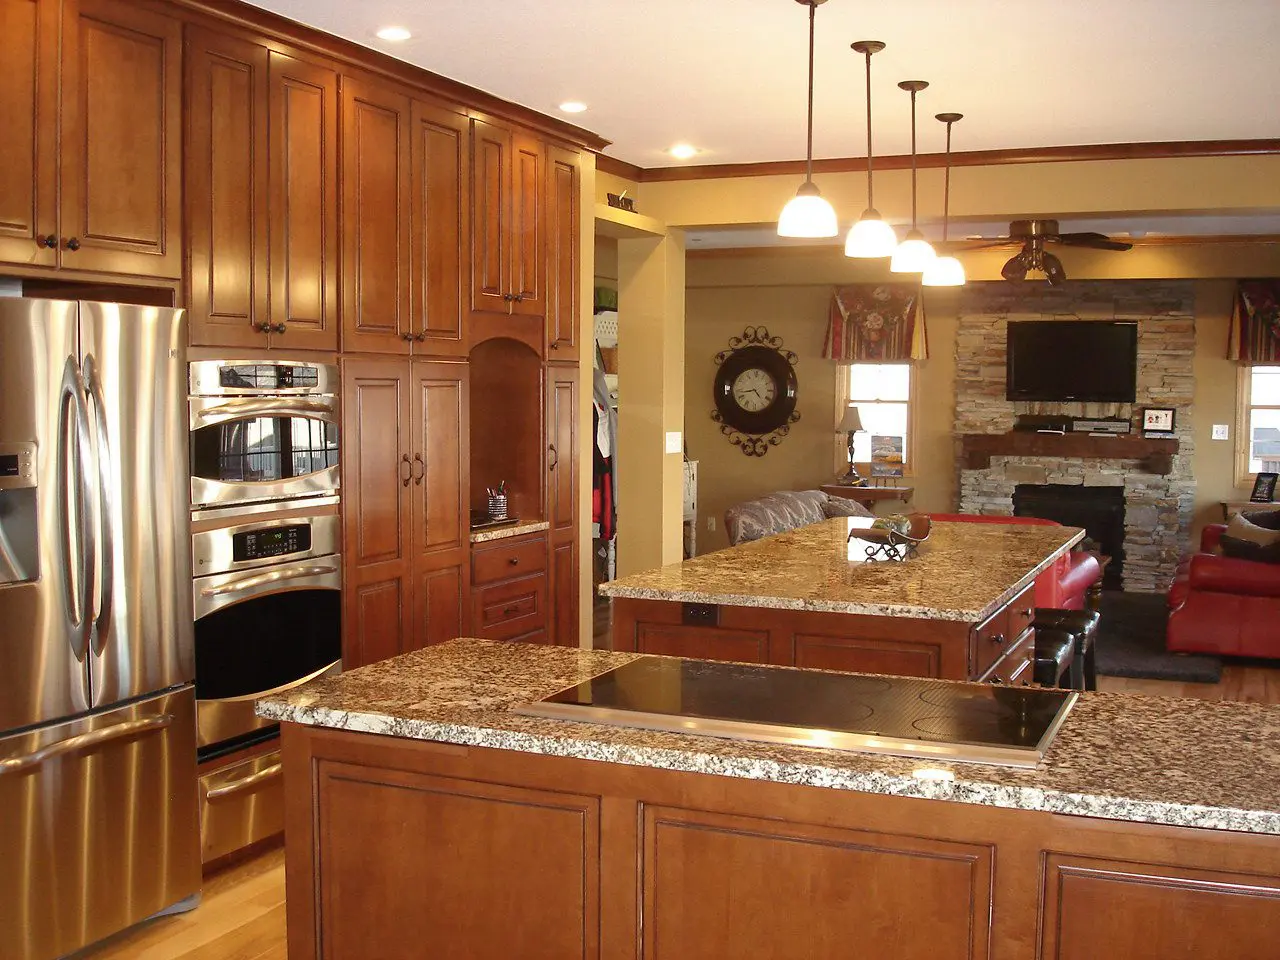 Woodberry kitchen remodelling with curio cabinets